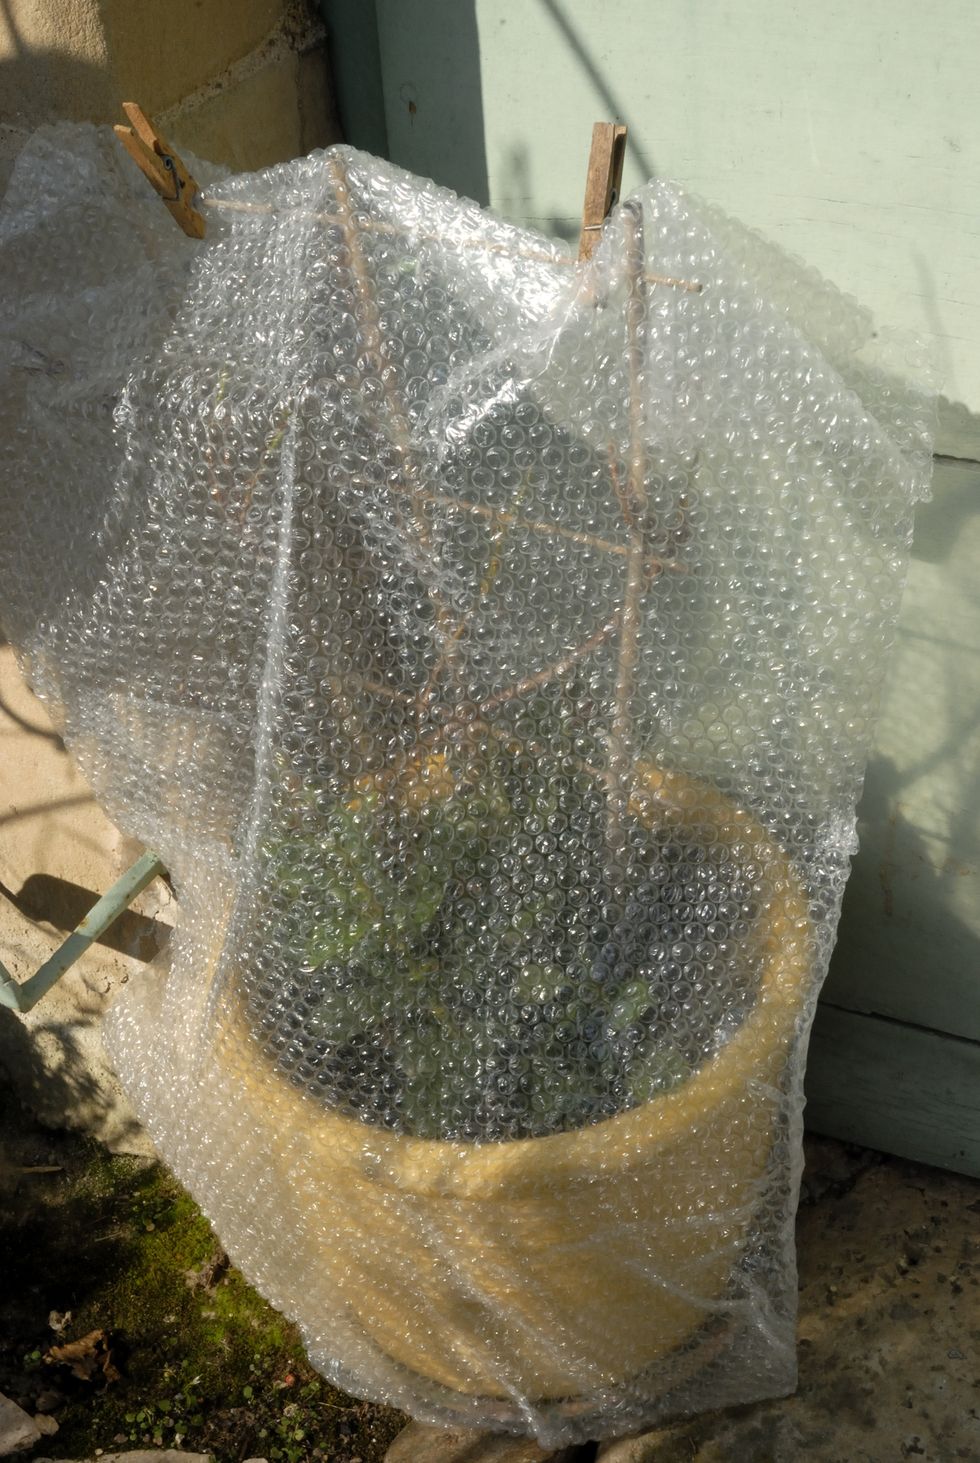 Outside plant protected from frost by bubble wrap